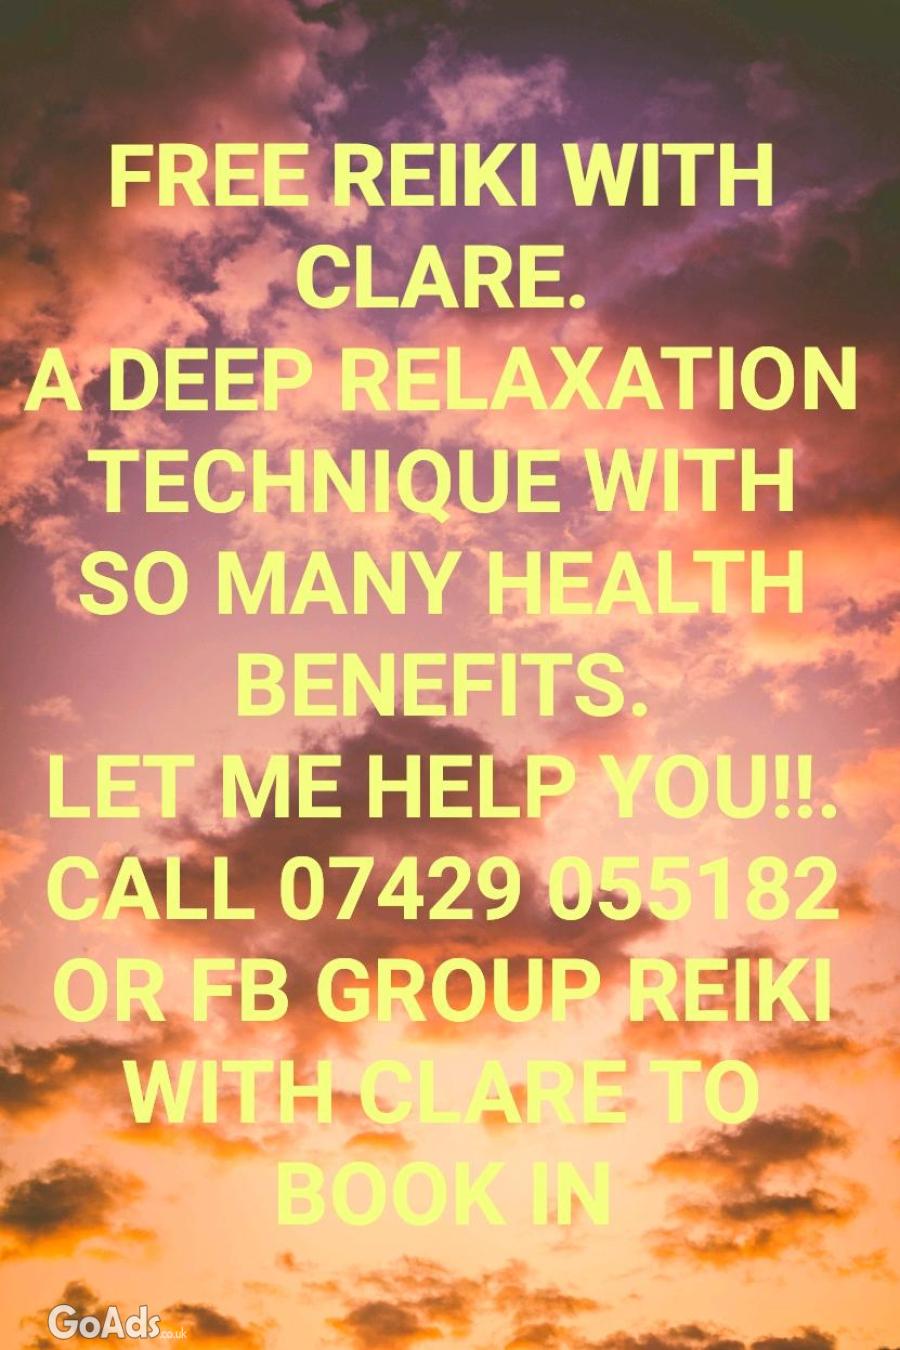 FREE REIKI WITH CLARE 